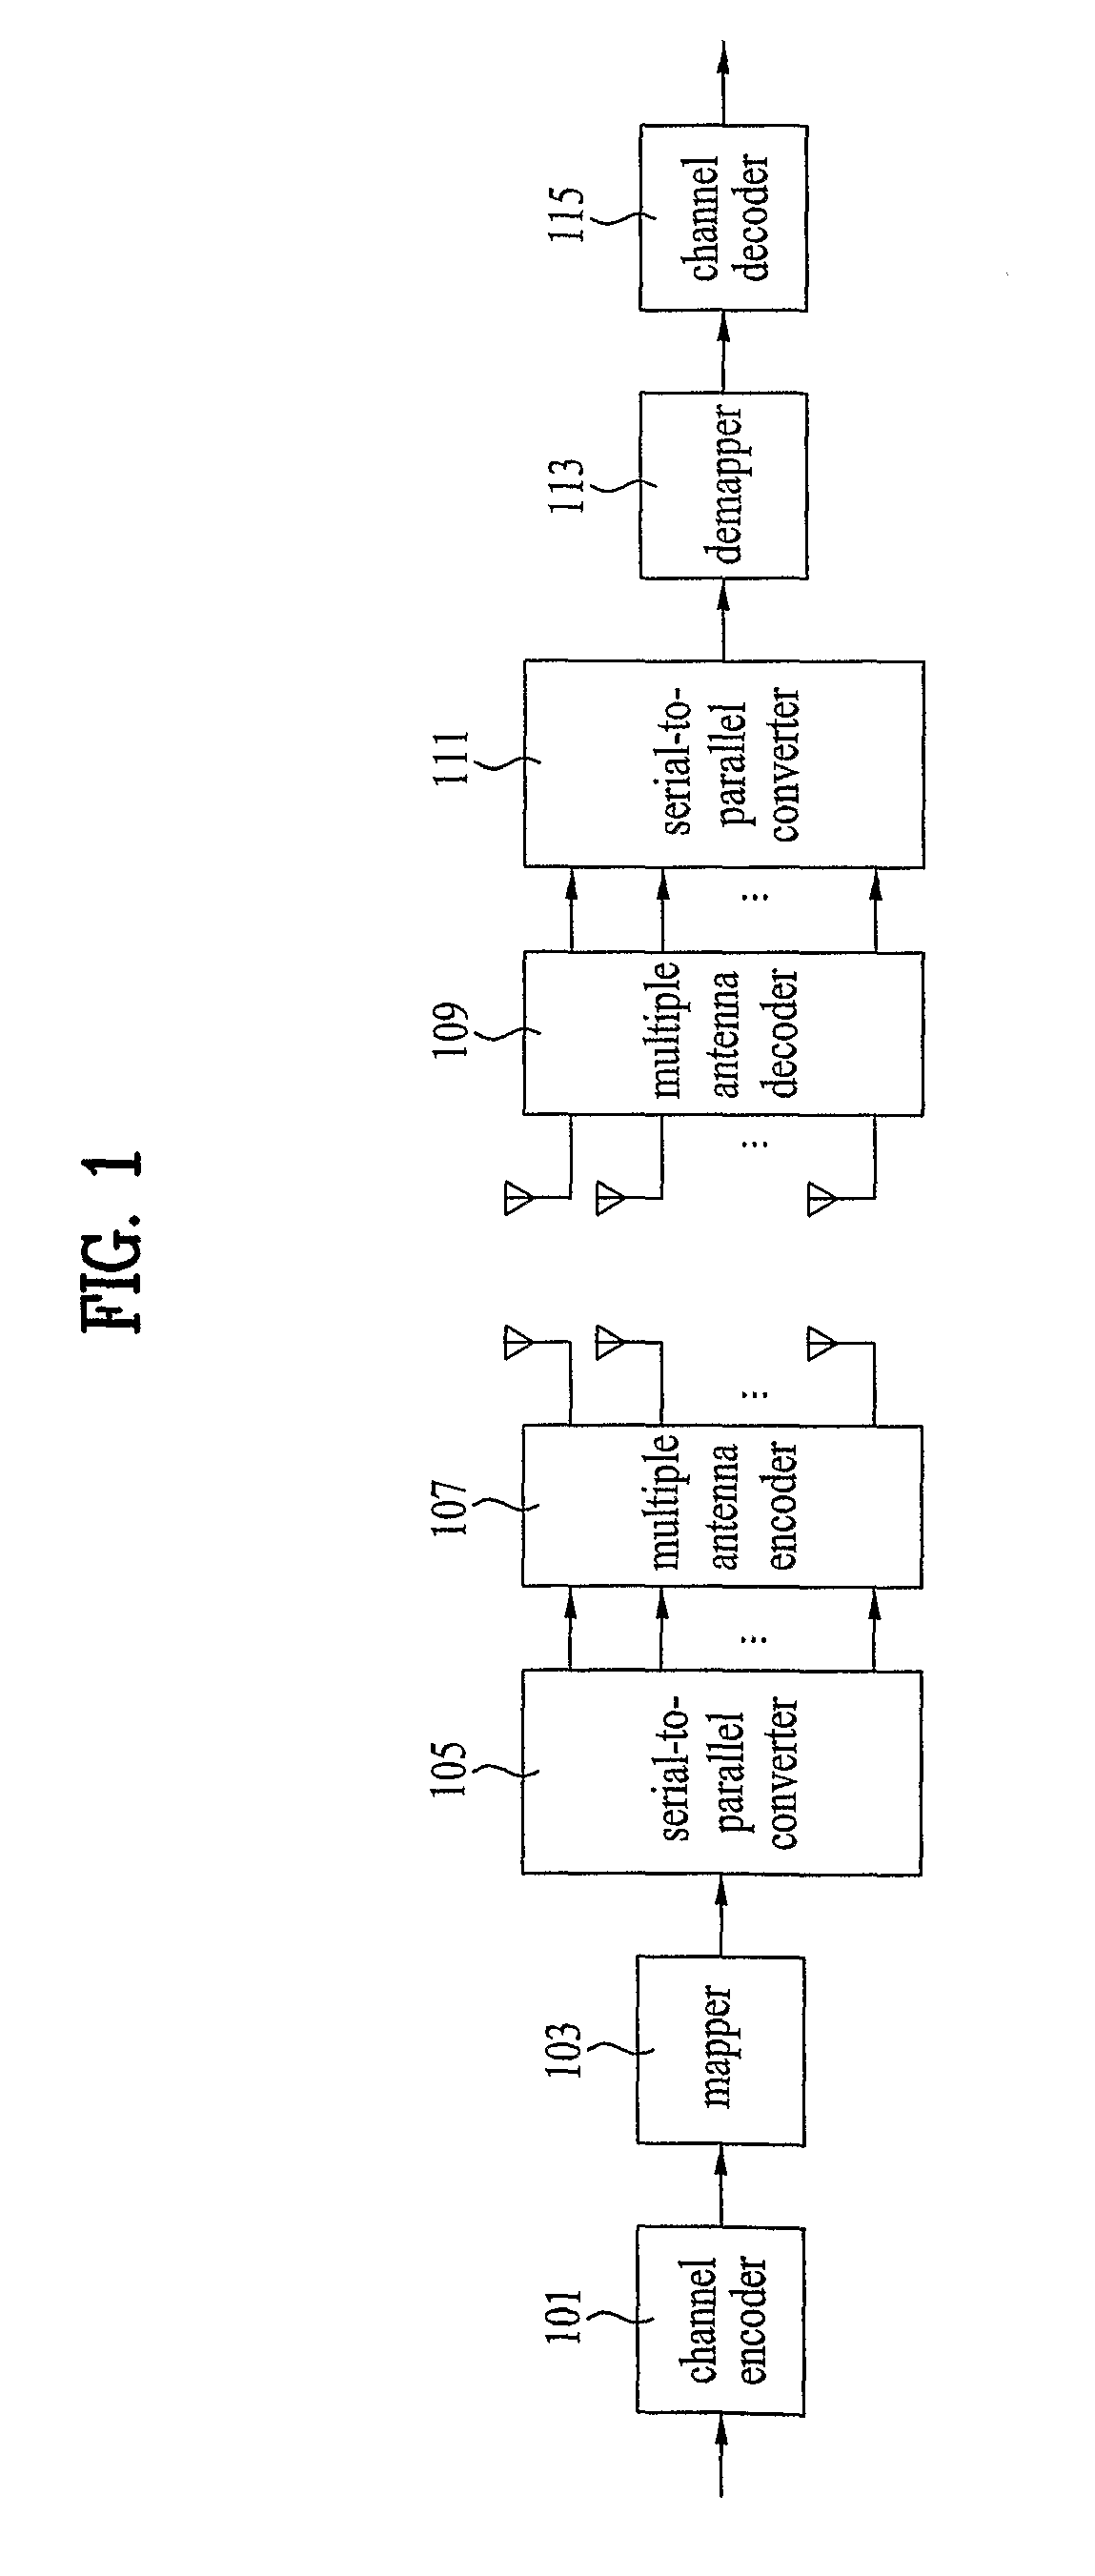 Method and apparatus for correcting errors in a multiple subcarriers communication system using multiple antennas